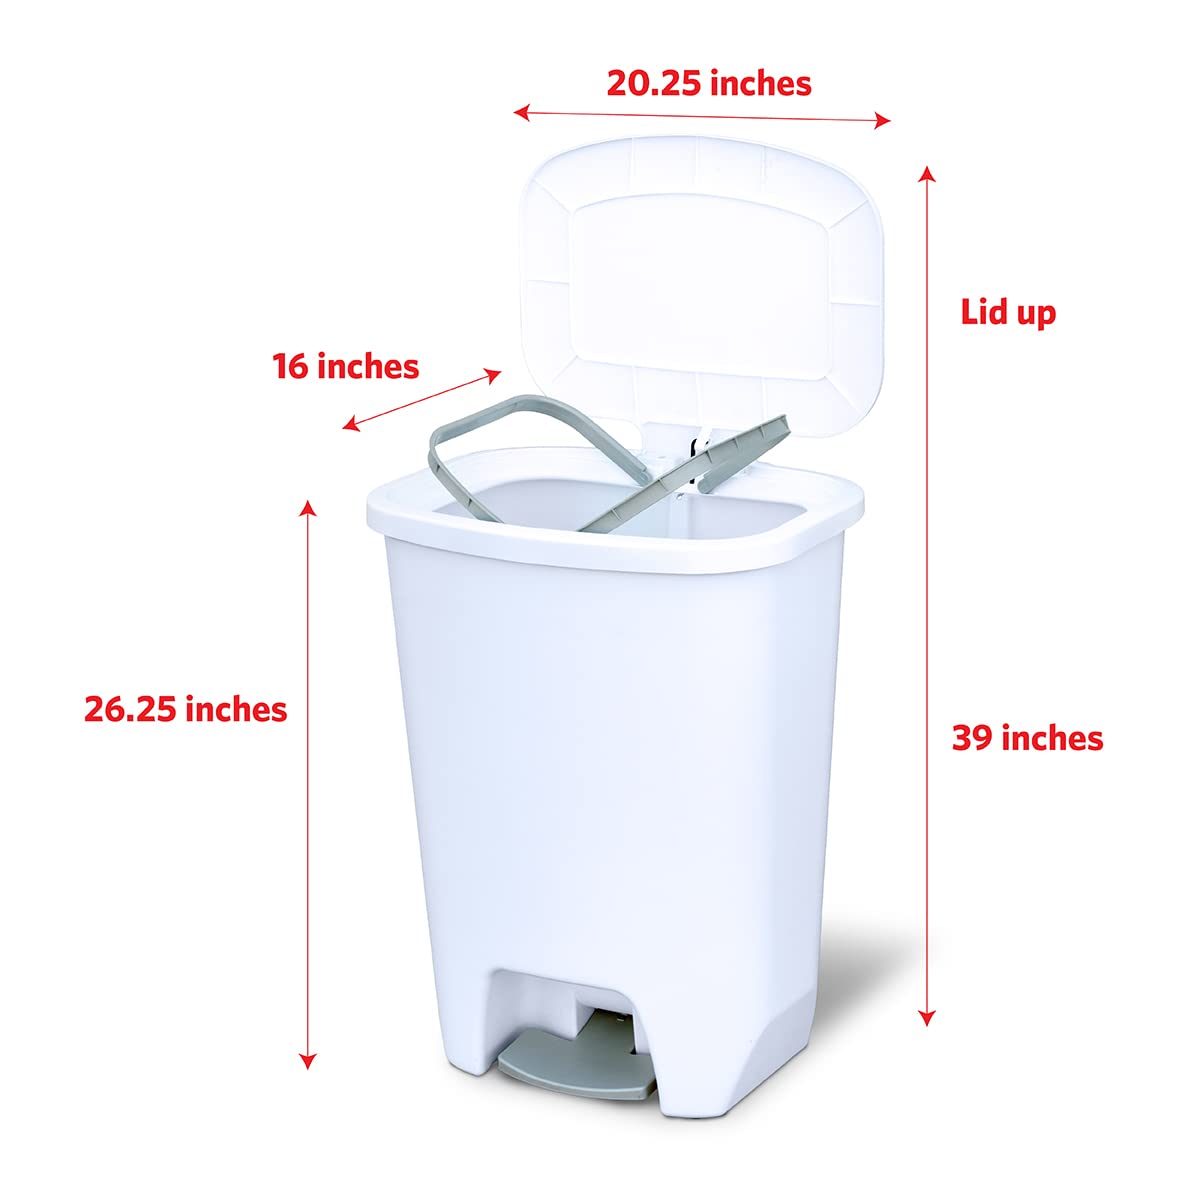 Glad 13 Gallon Trash Can, Plastic Kitchen Waste Bin with Odor Protection  of Lid, Hands Free with Step On Foot Pedal and Garbage Bag Rings, 13 Gallon,  White